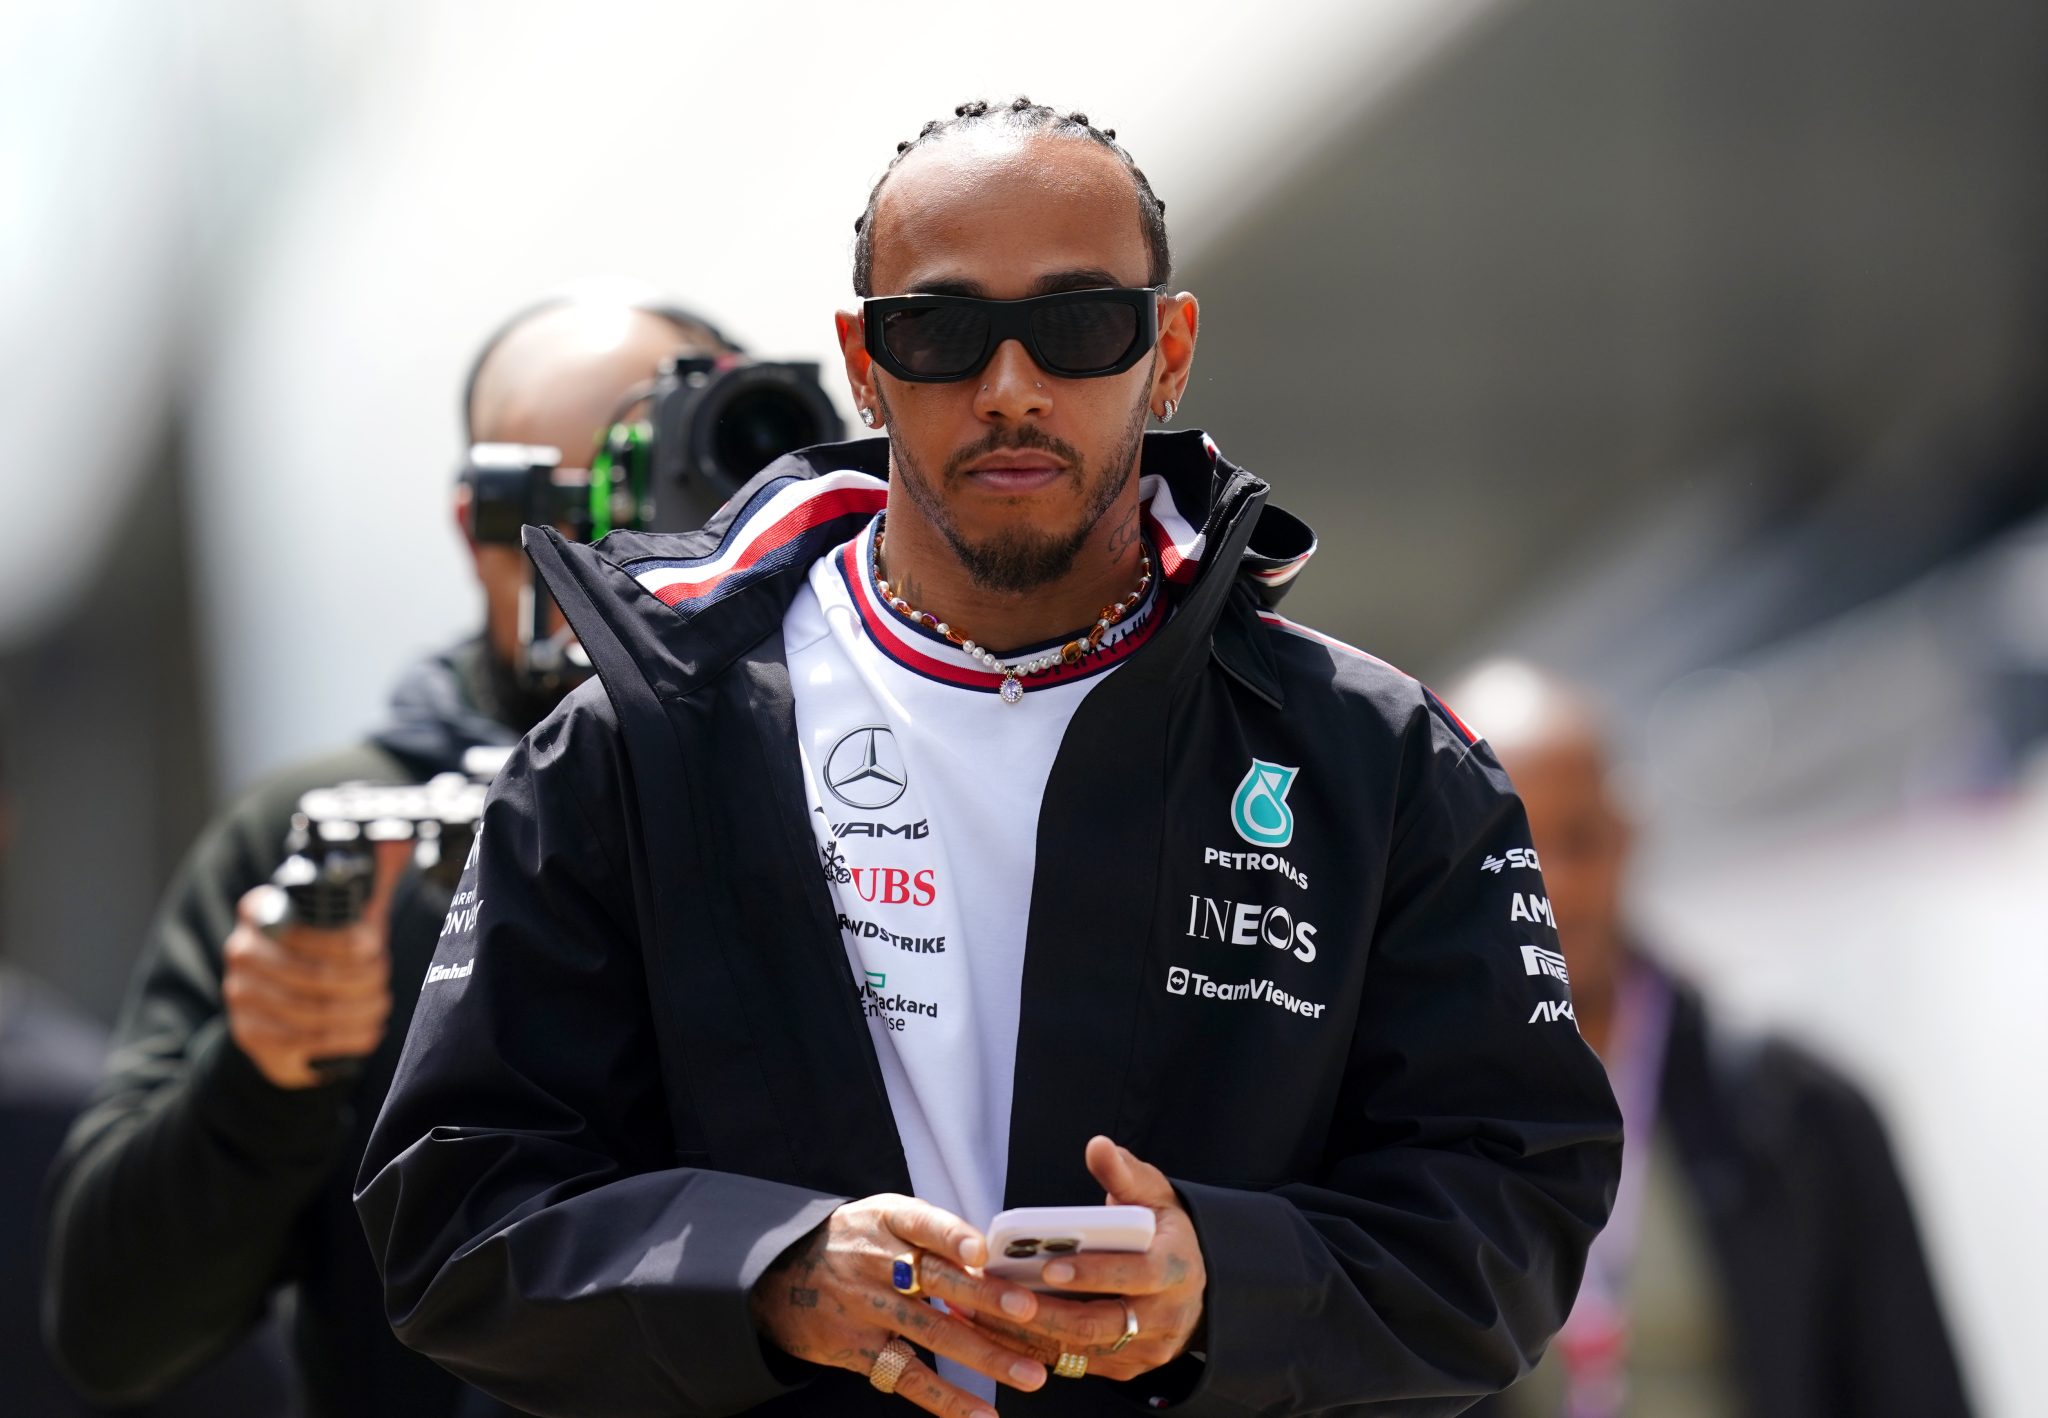 Lewis Hamilton promises to keep his cool on team radio after Austrian flashpoint